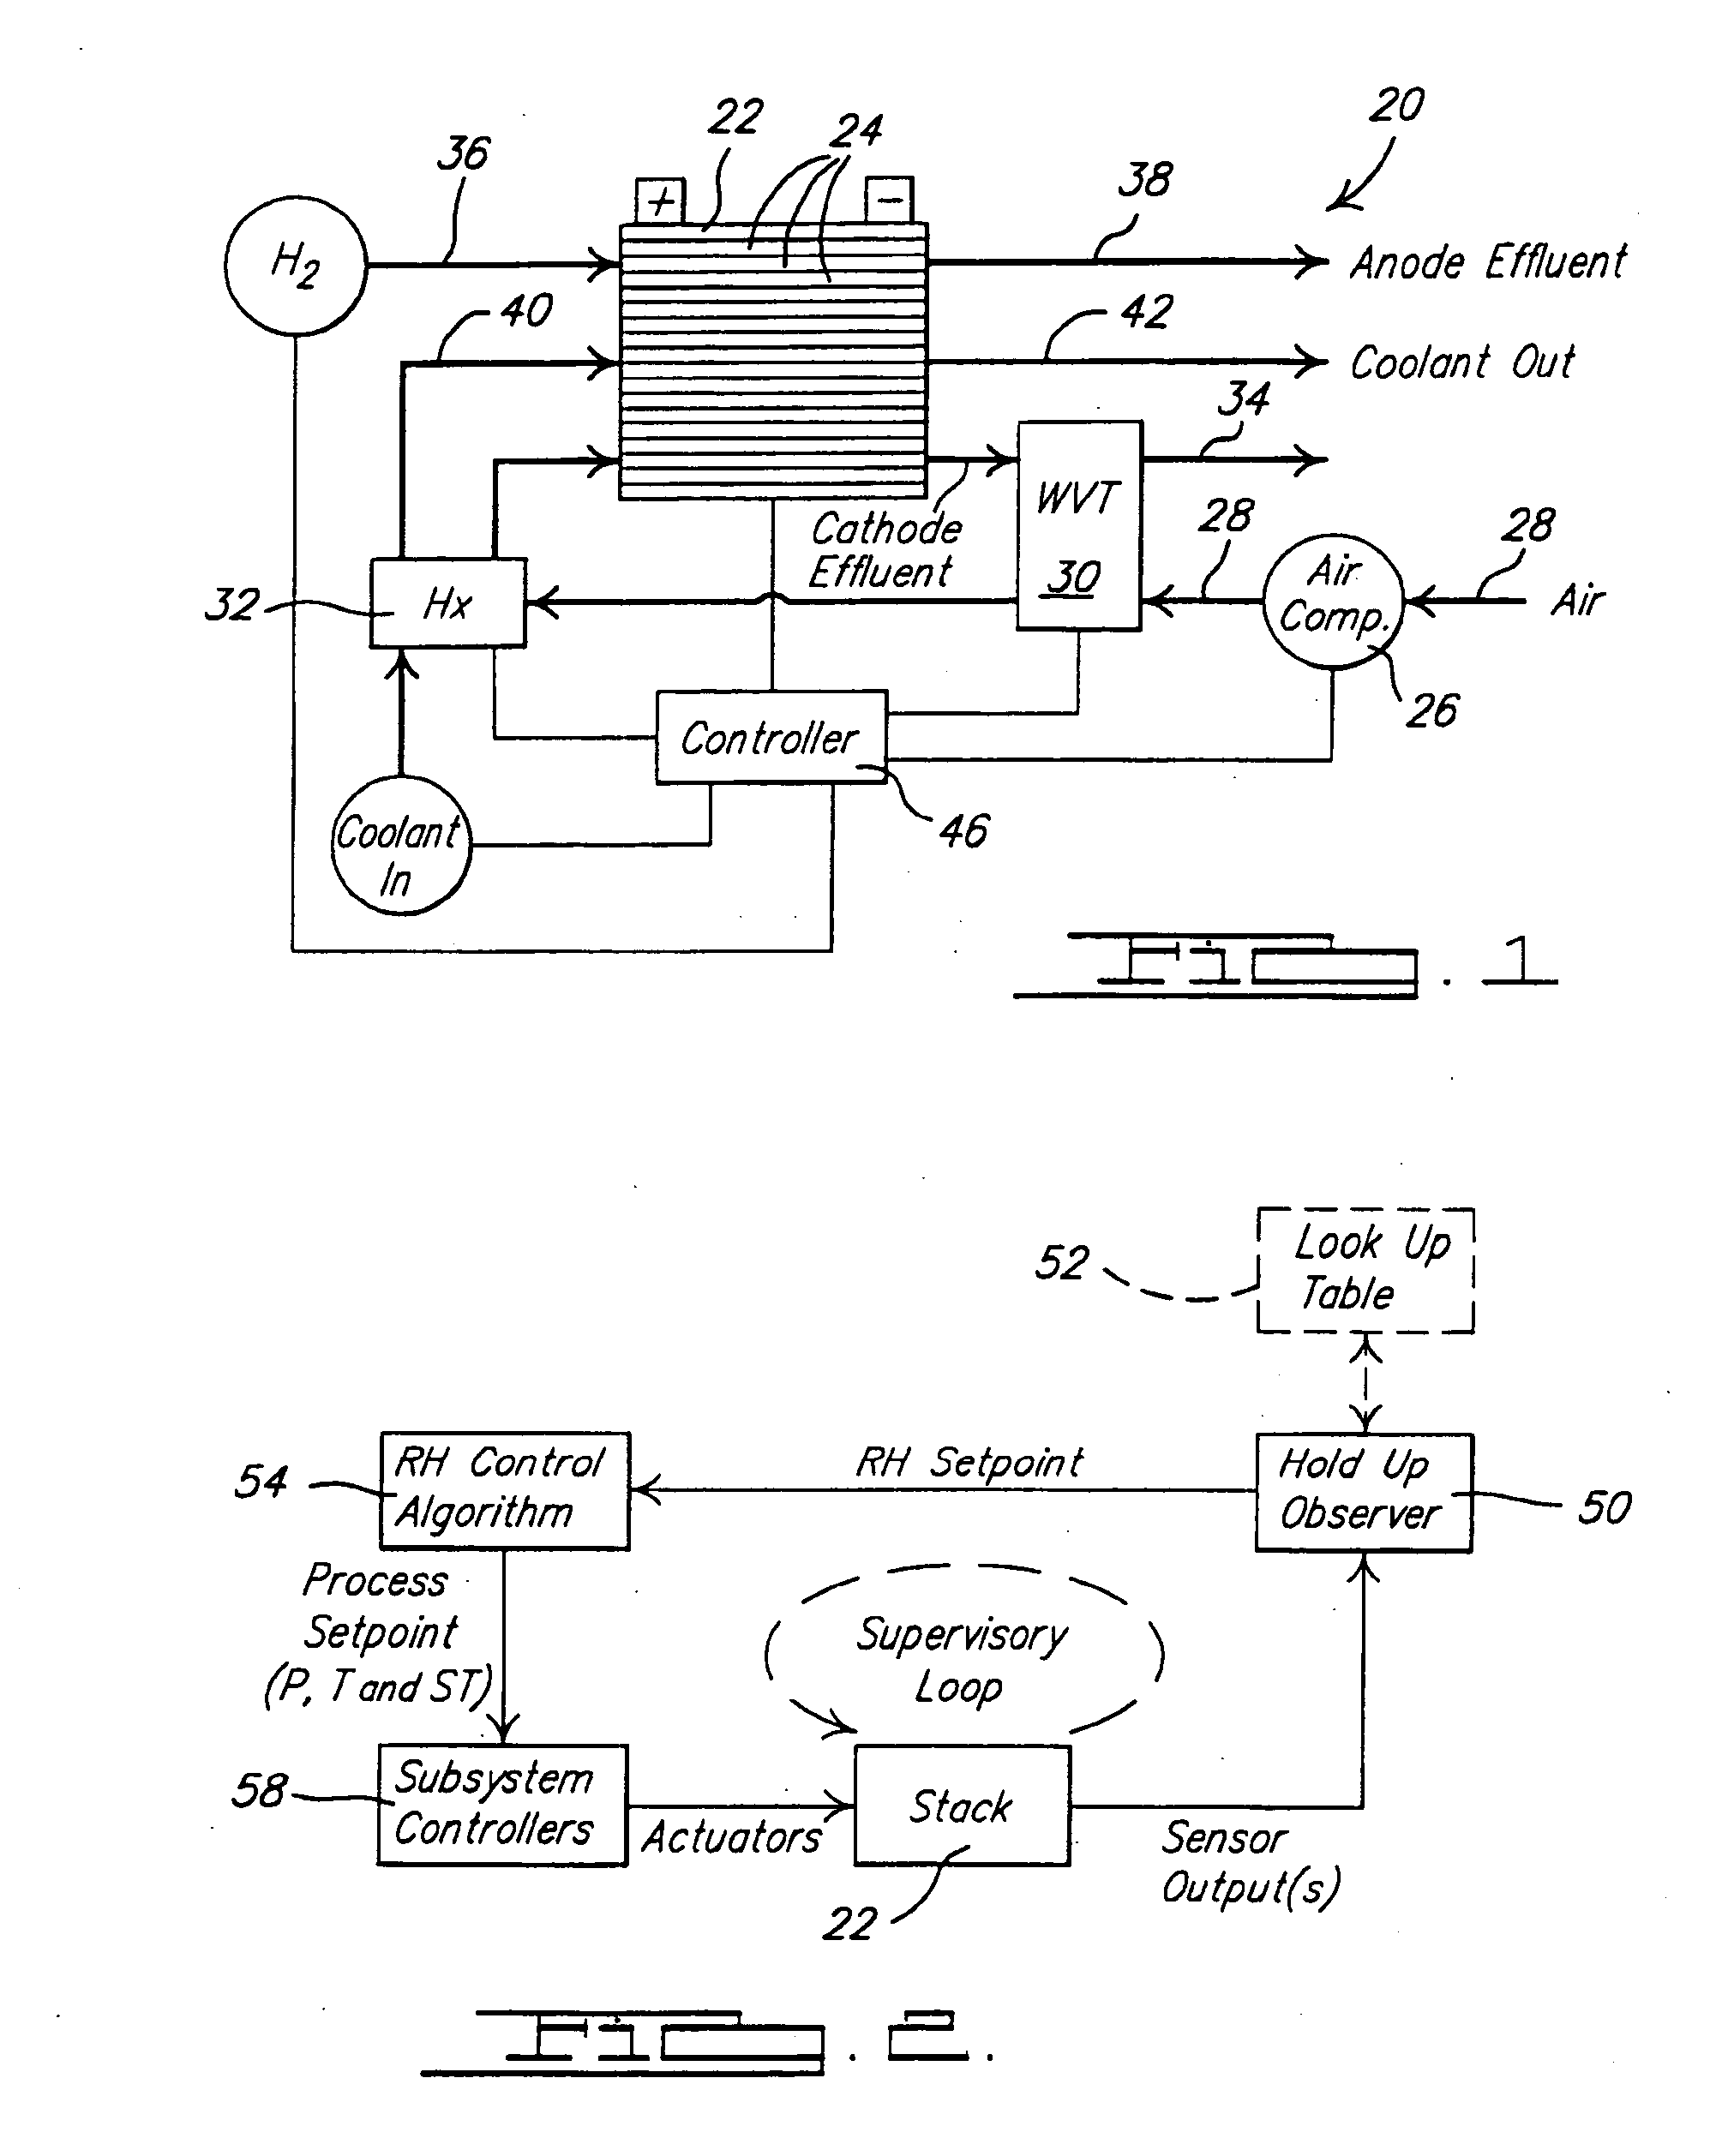 Management via dynamic water holdup estimator in a fuel cell